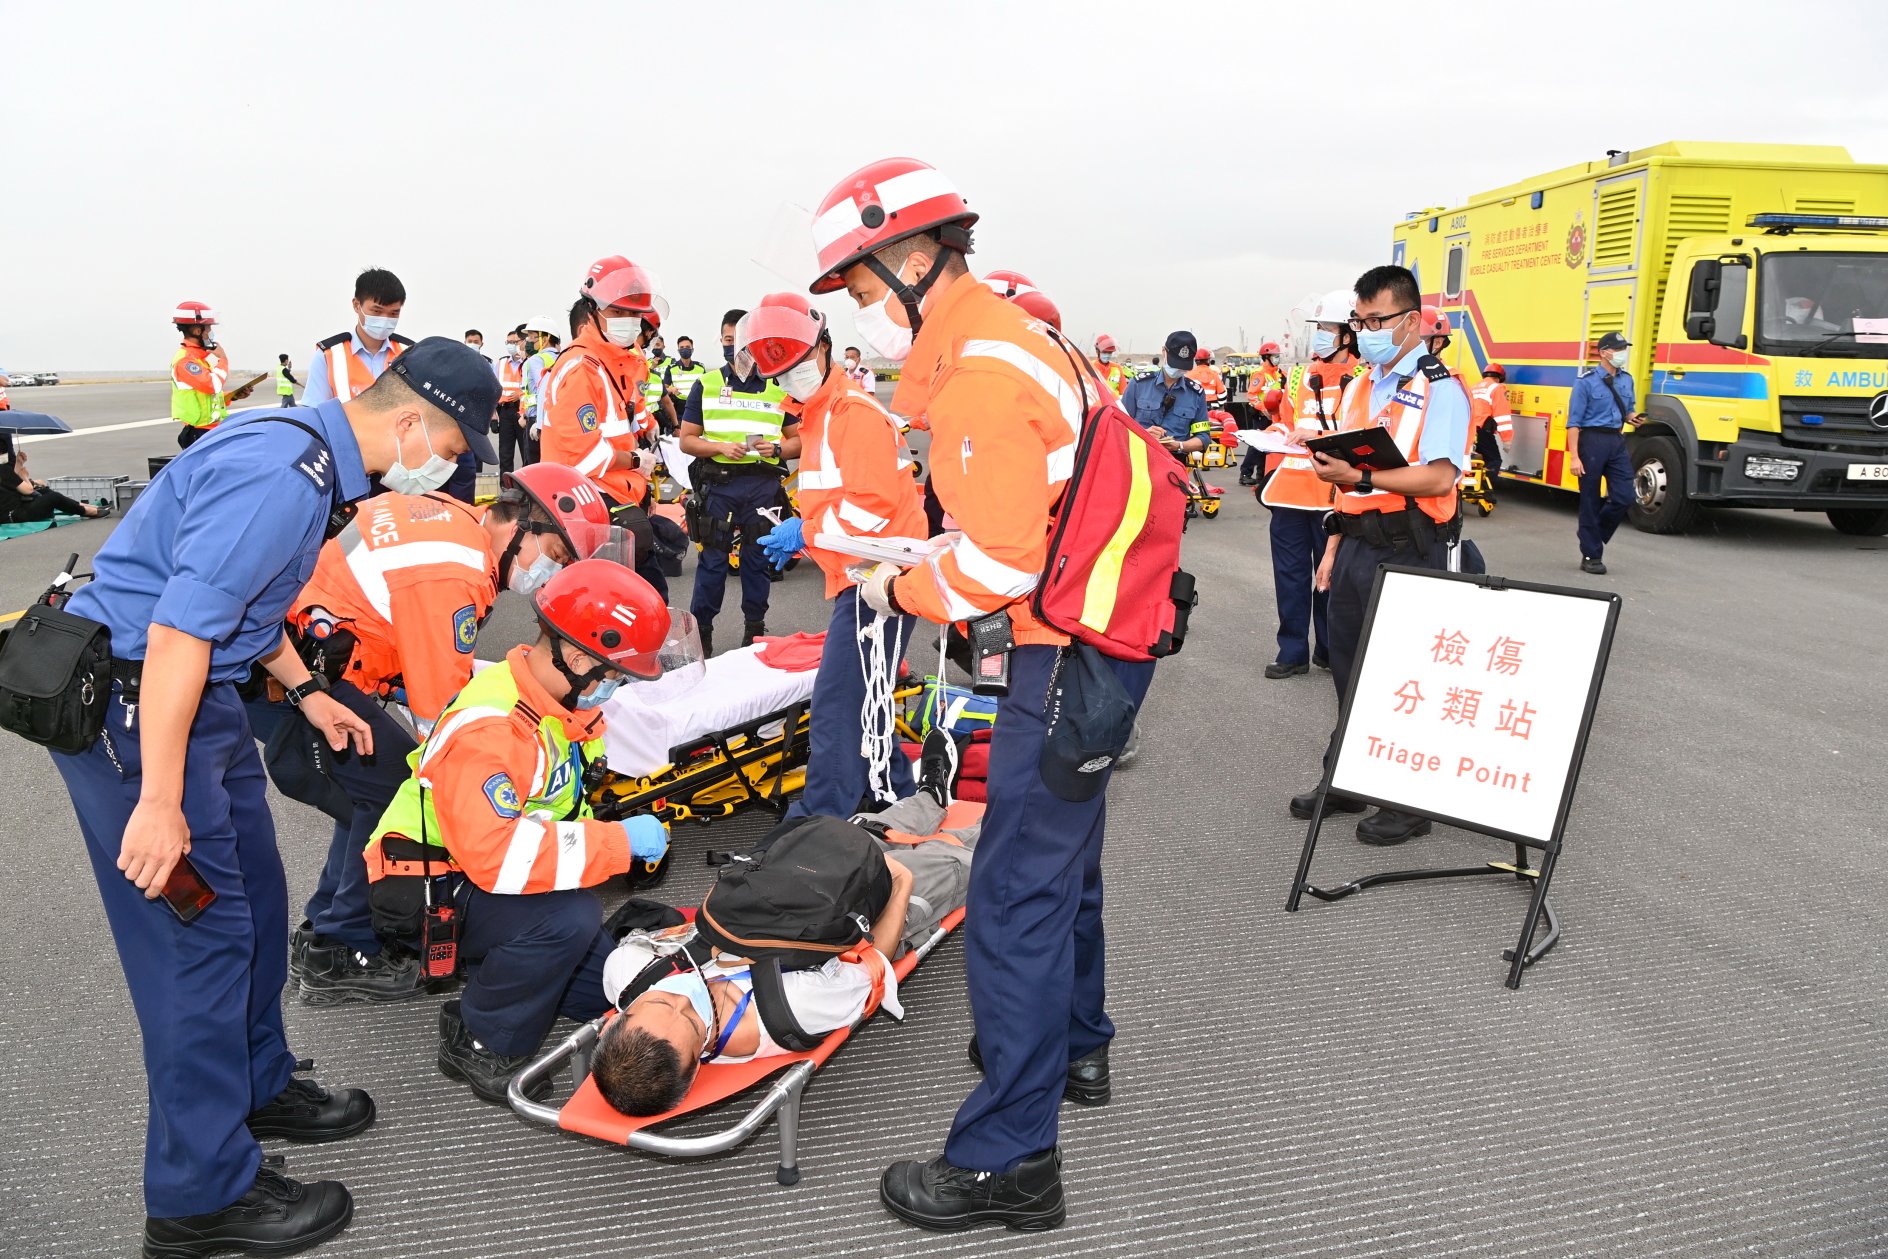 Aircraft crash and rescue exercise at HKIA. Click to enlarge.